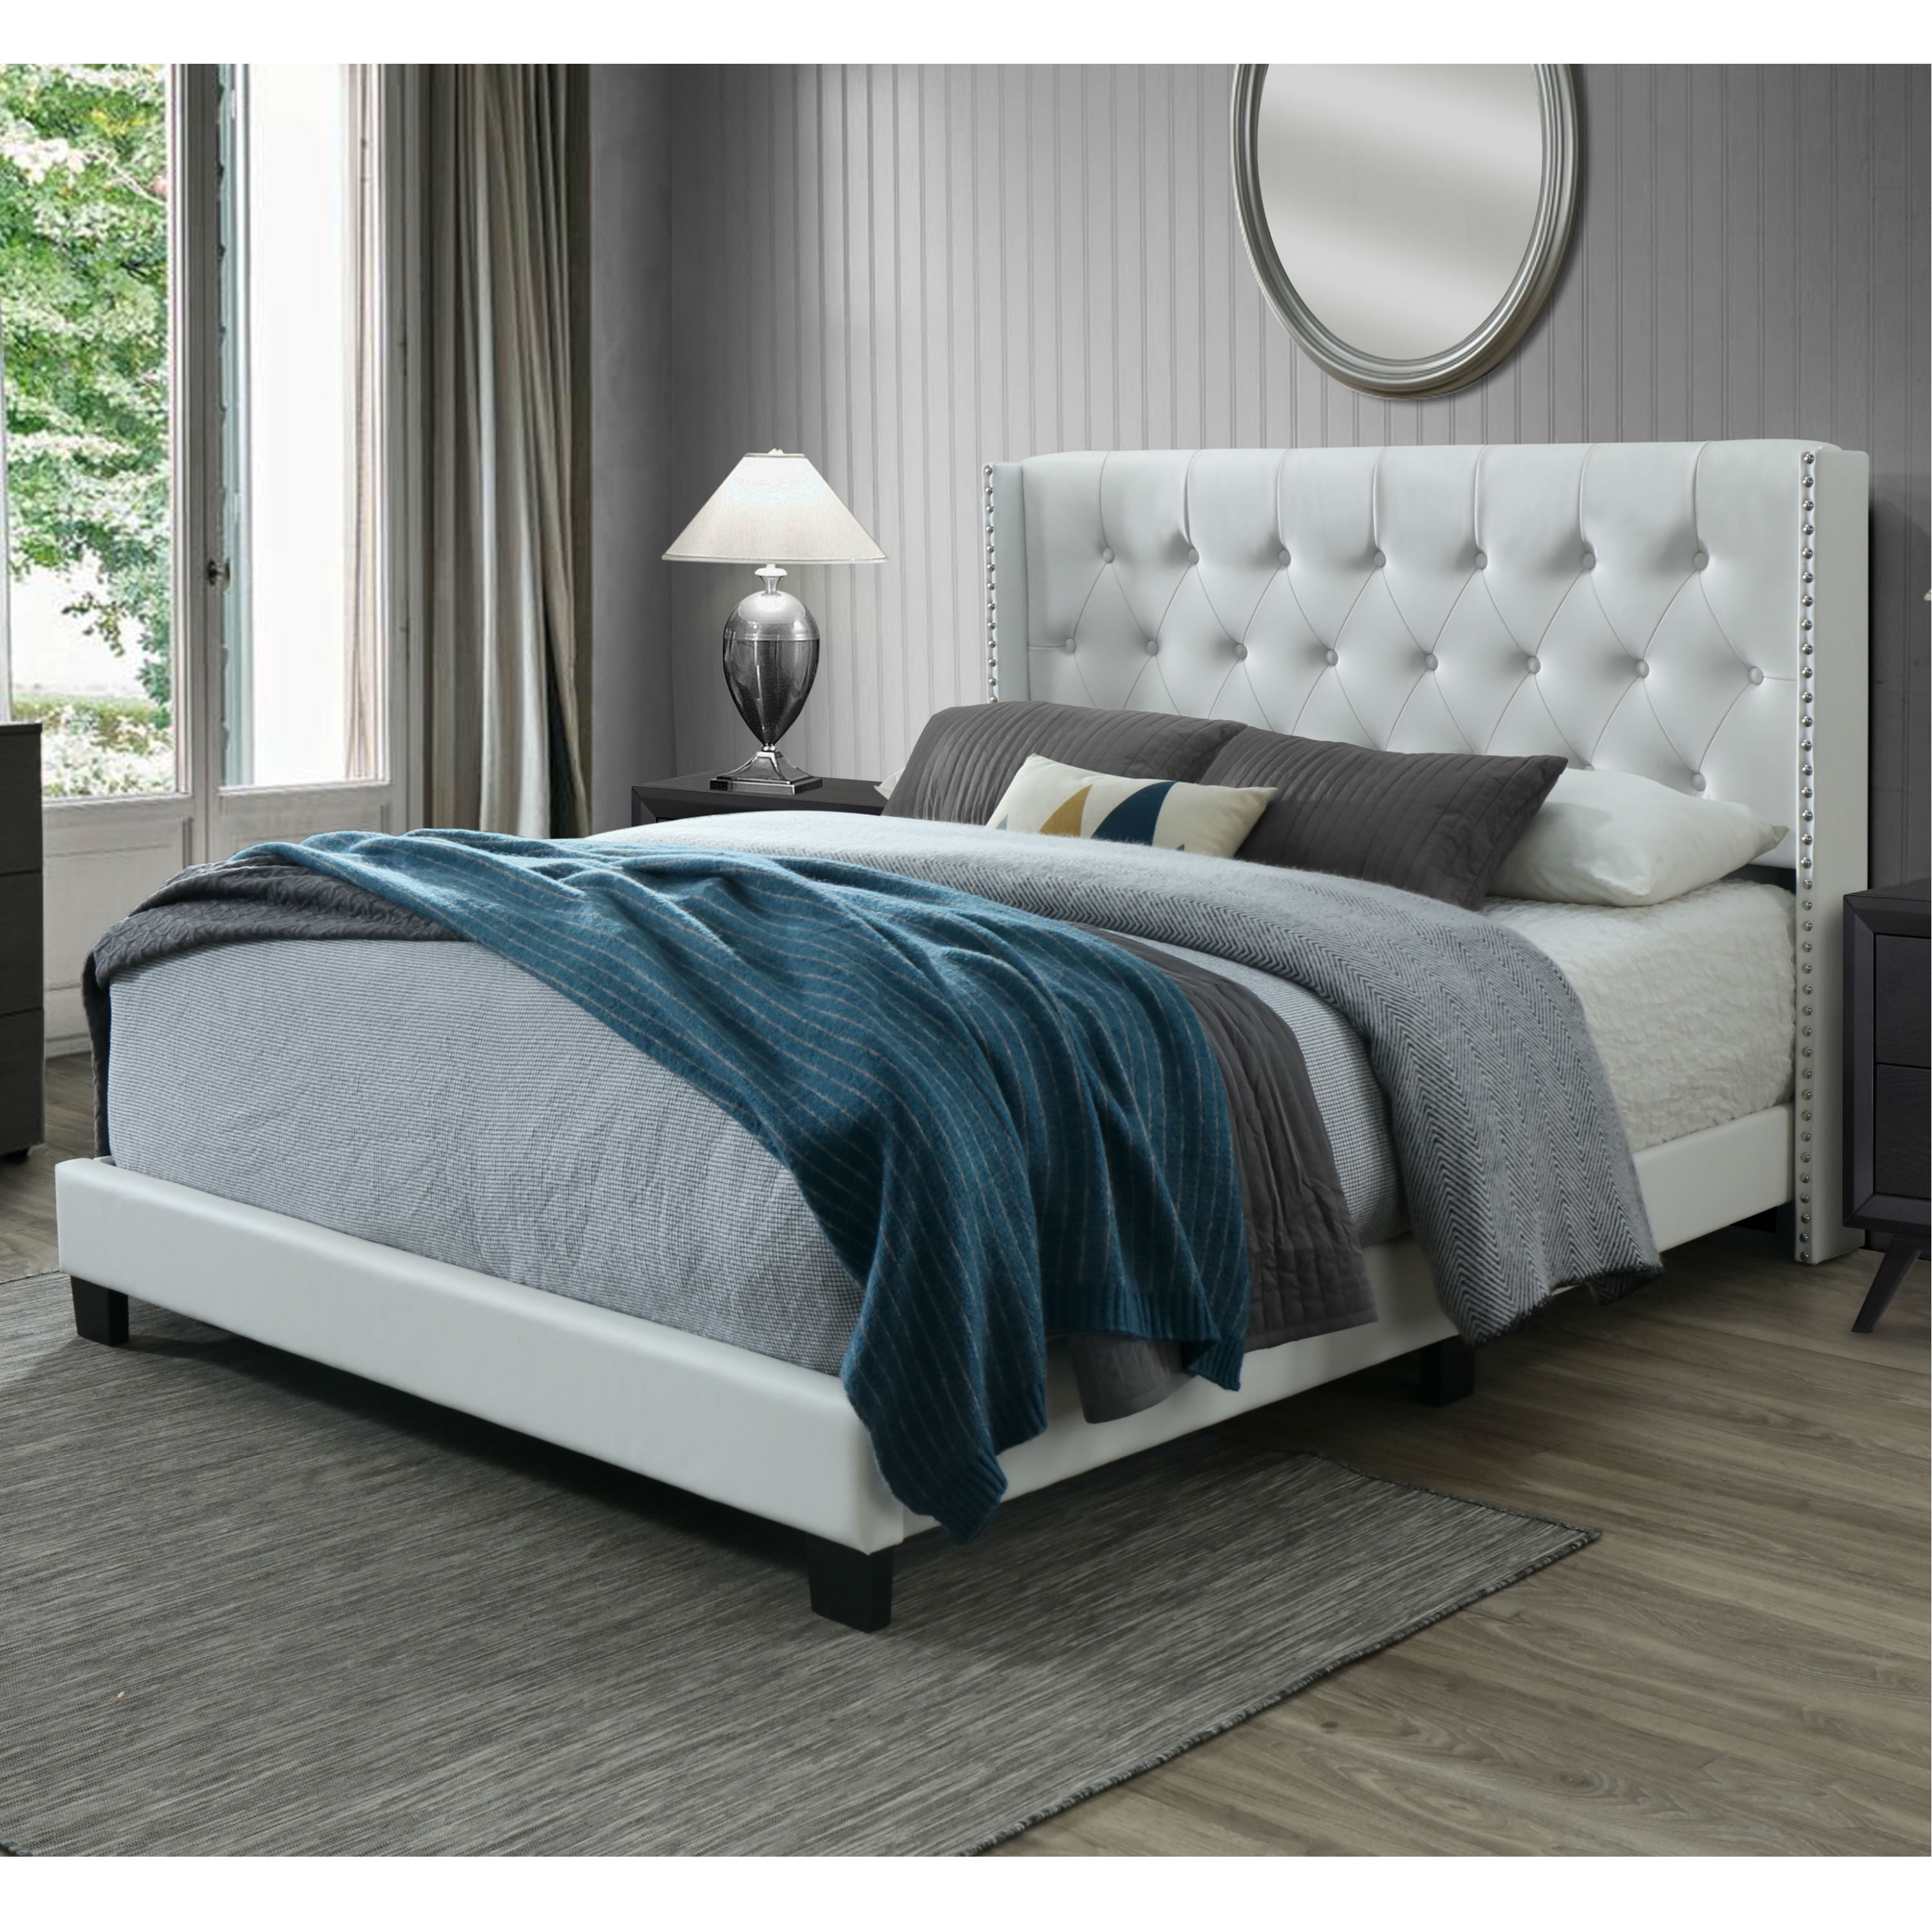 Panel Bed Frame Queen Size, White Tufted Leather Bed